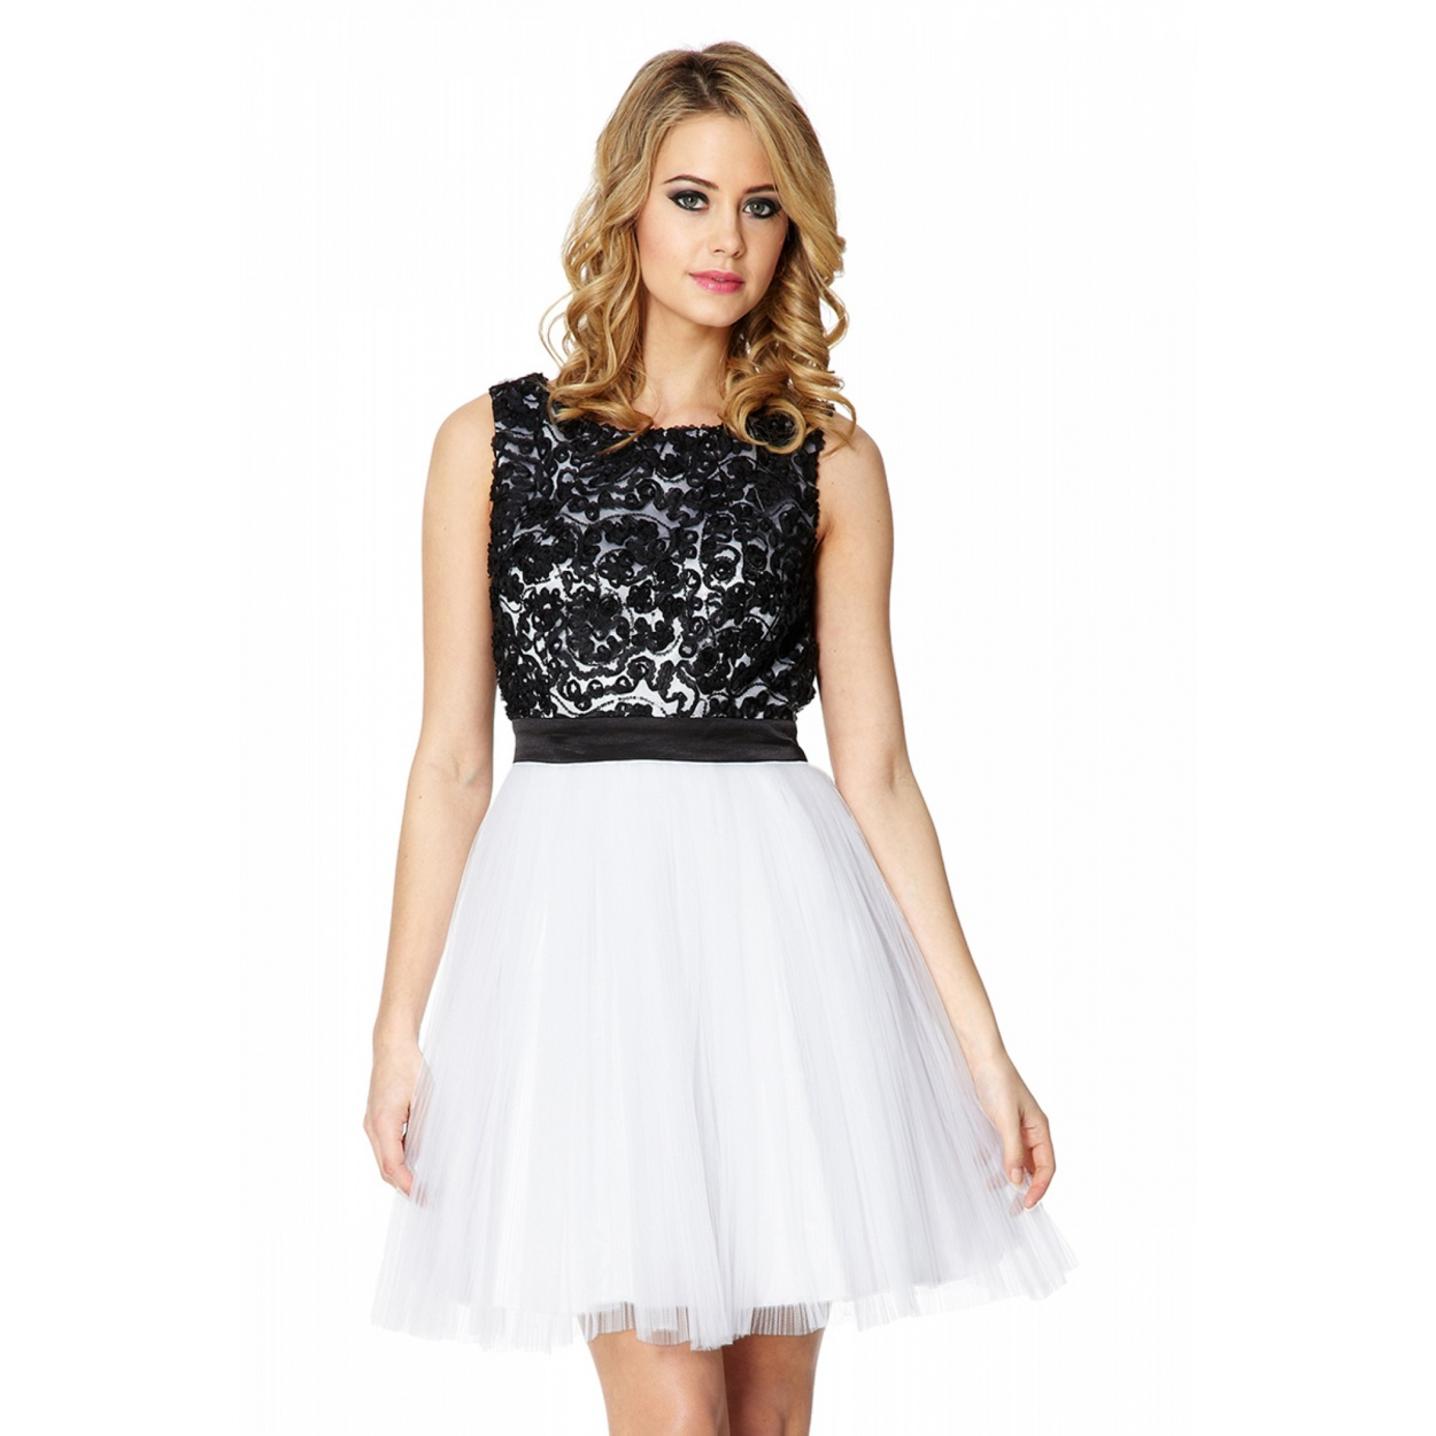 Lace Dress Black And White And Clothes Review